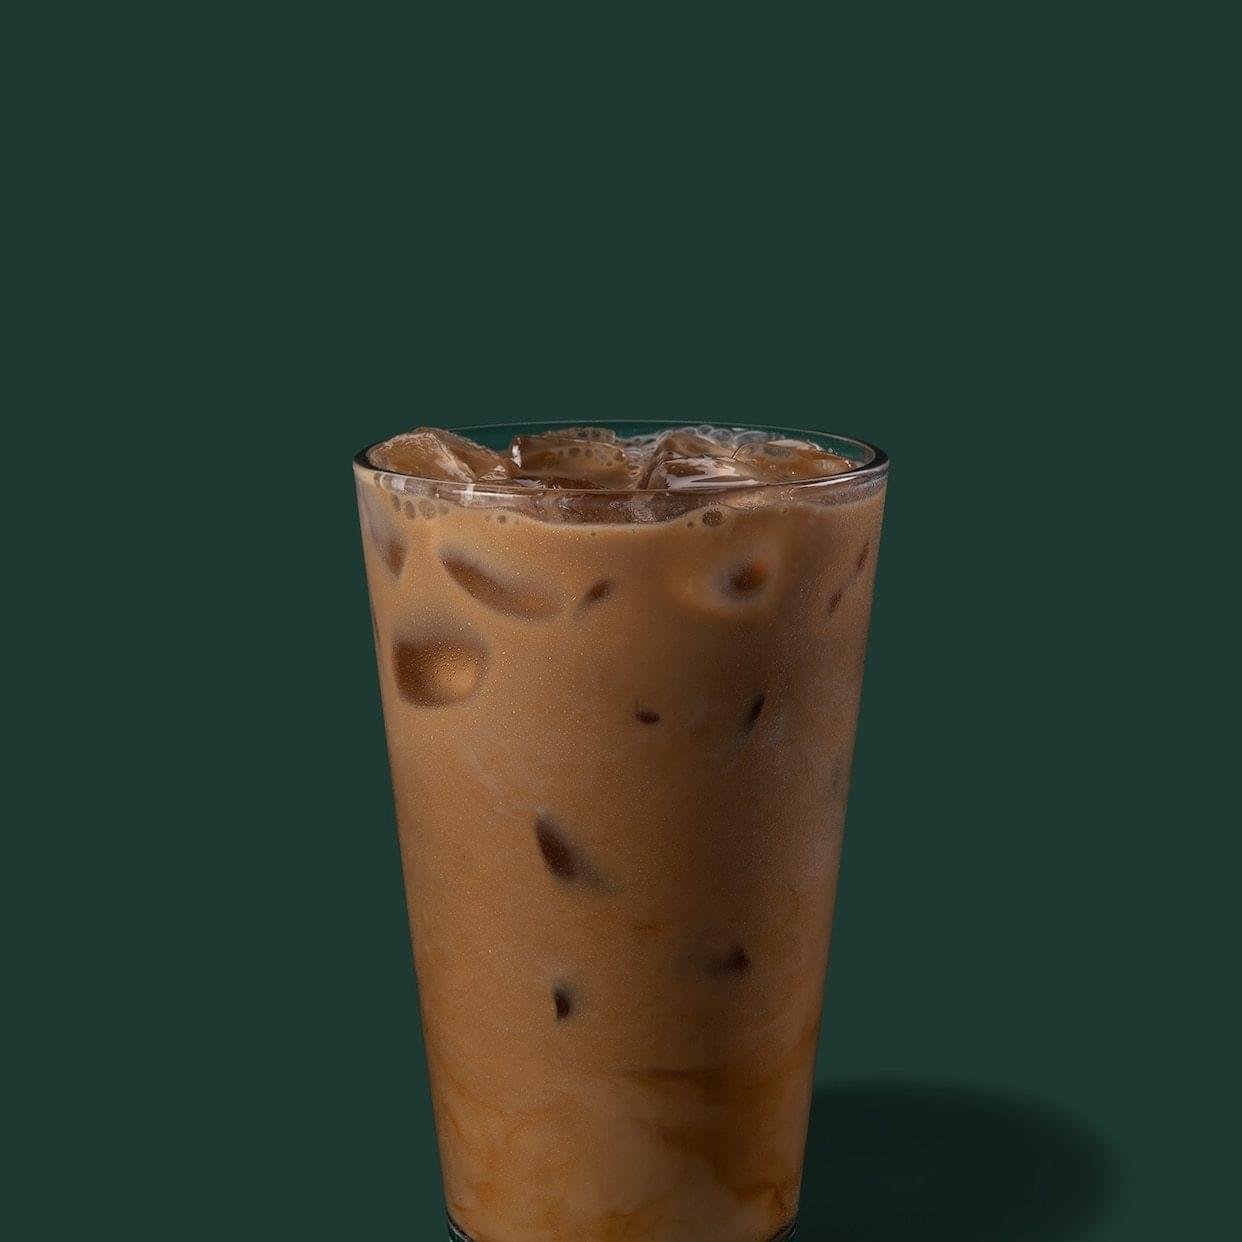 Starbucks Venti Iced Flat White Nutrition Facts